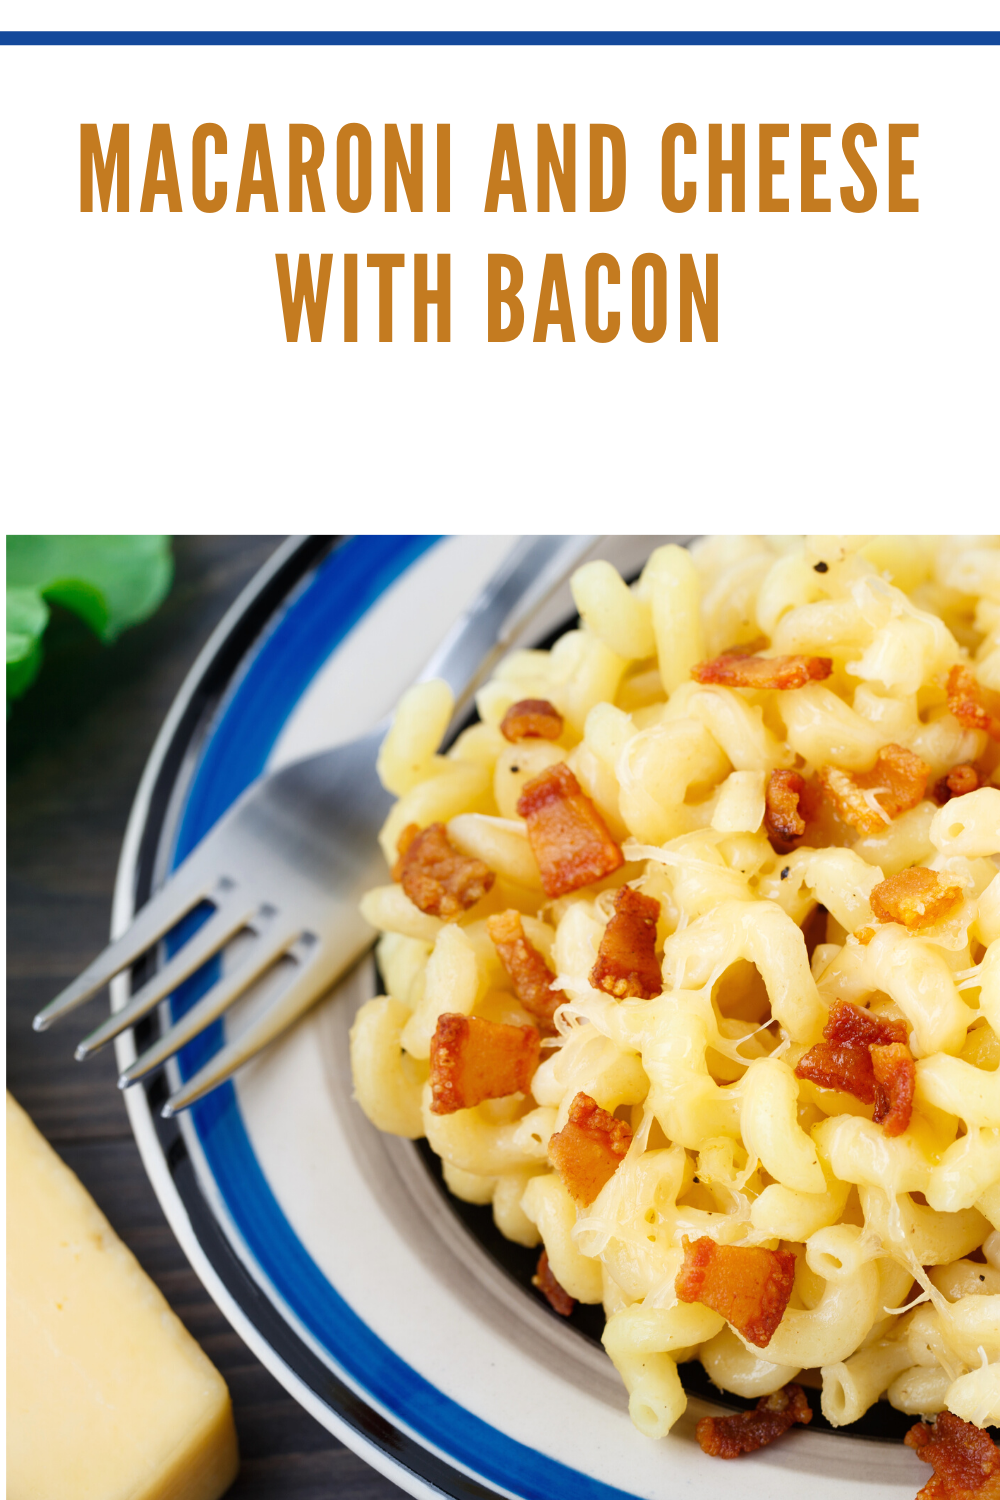 We all grew up on Macaroni and Cheese. It's always a great meal, but this Bacon Macaroni and Cheese recipe will elevate the meal.